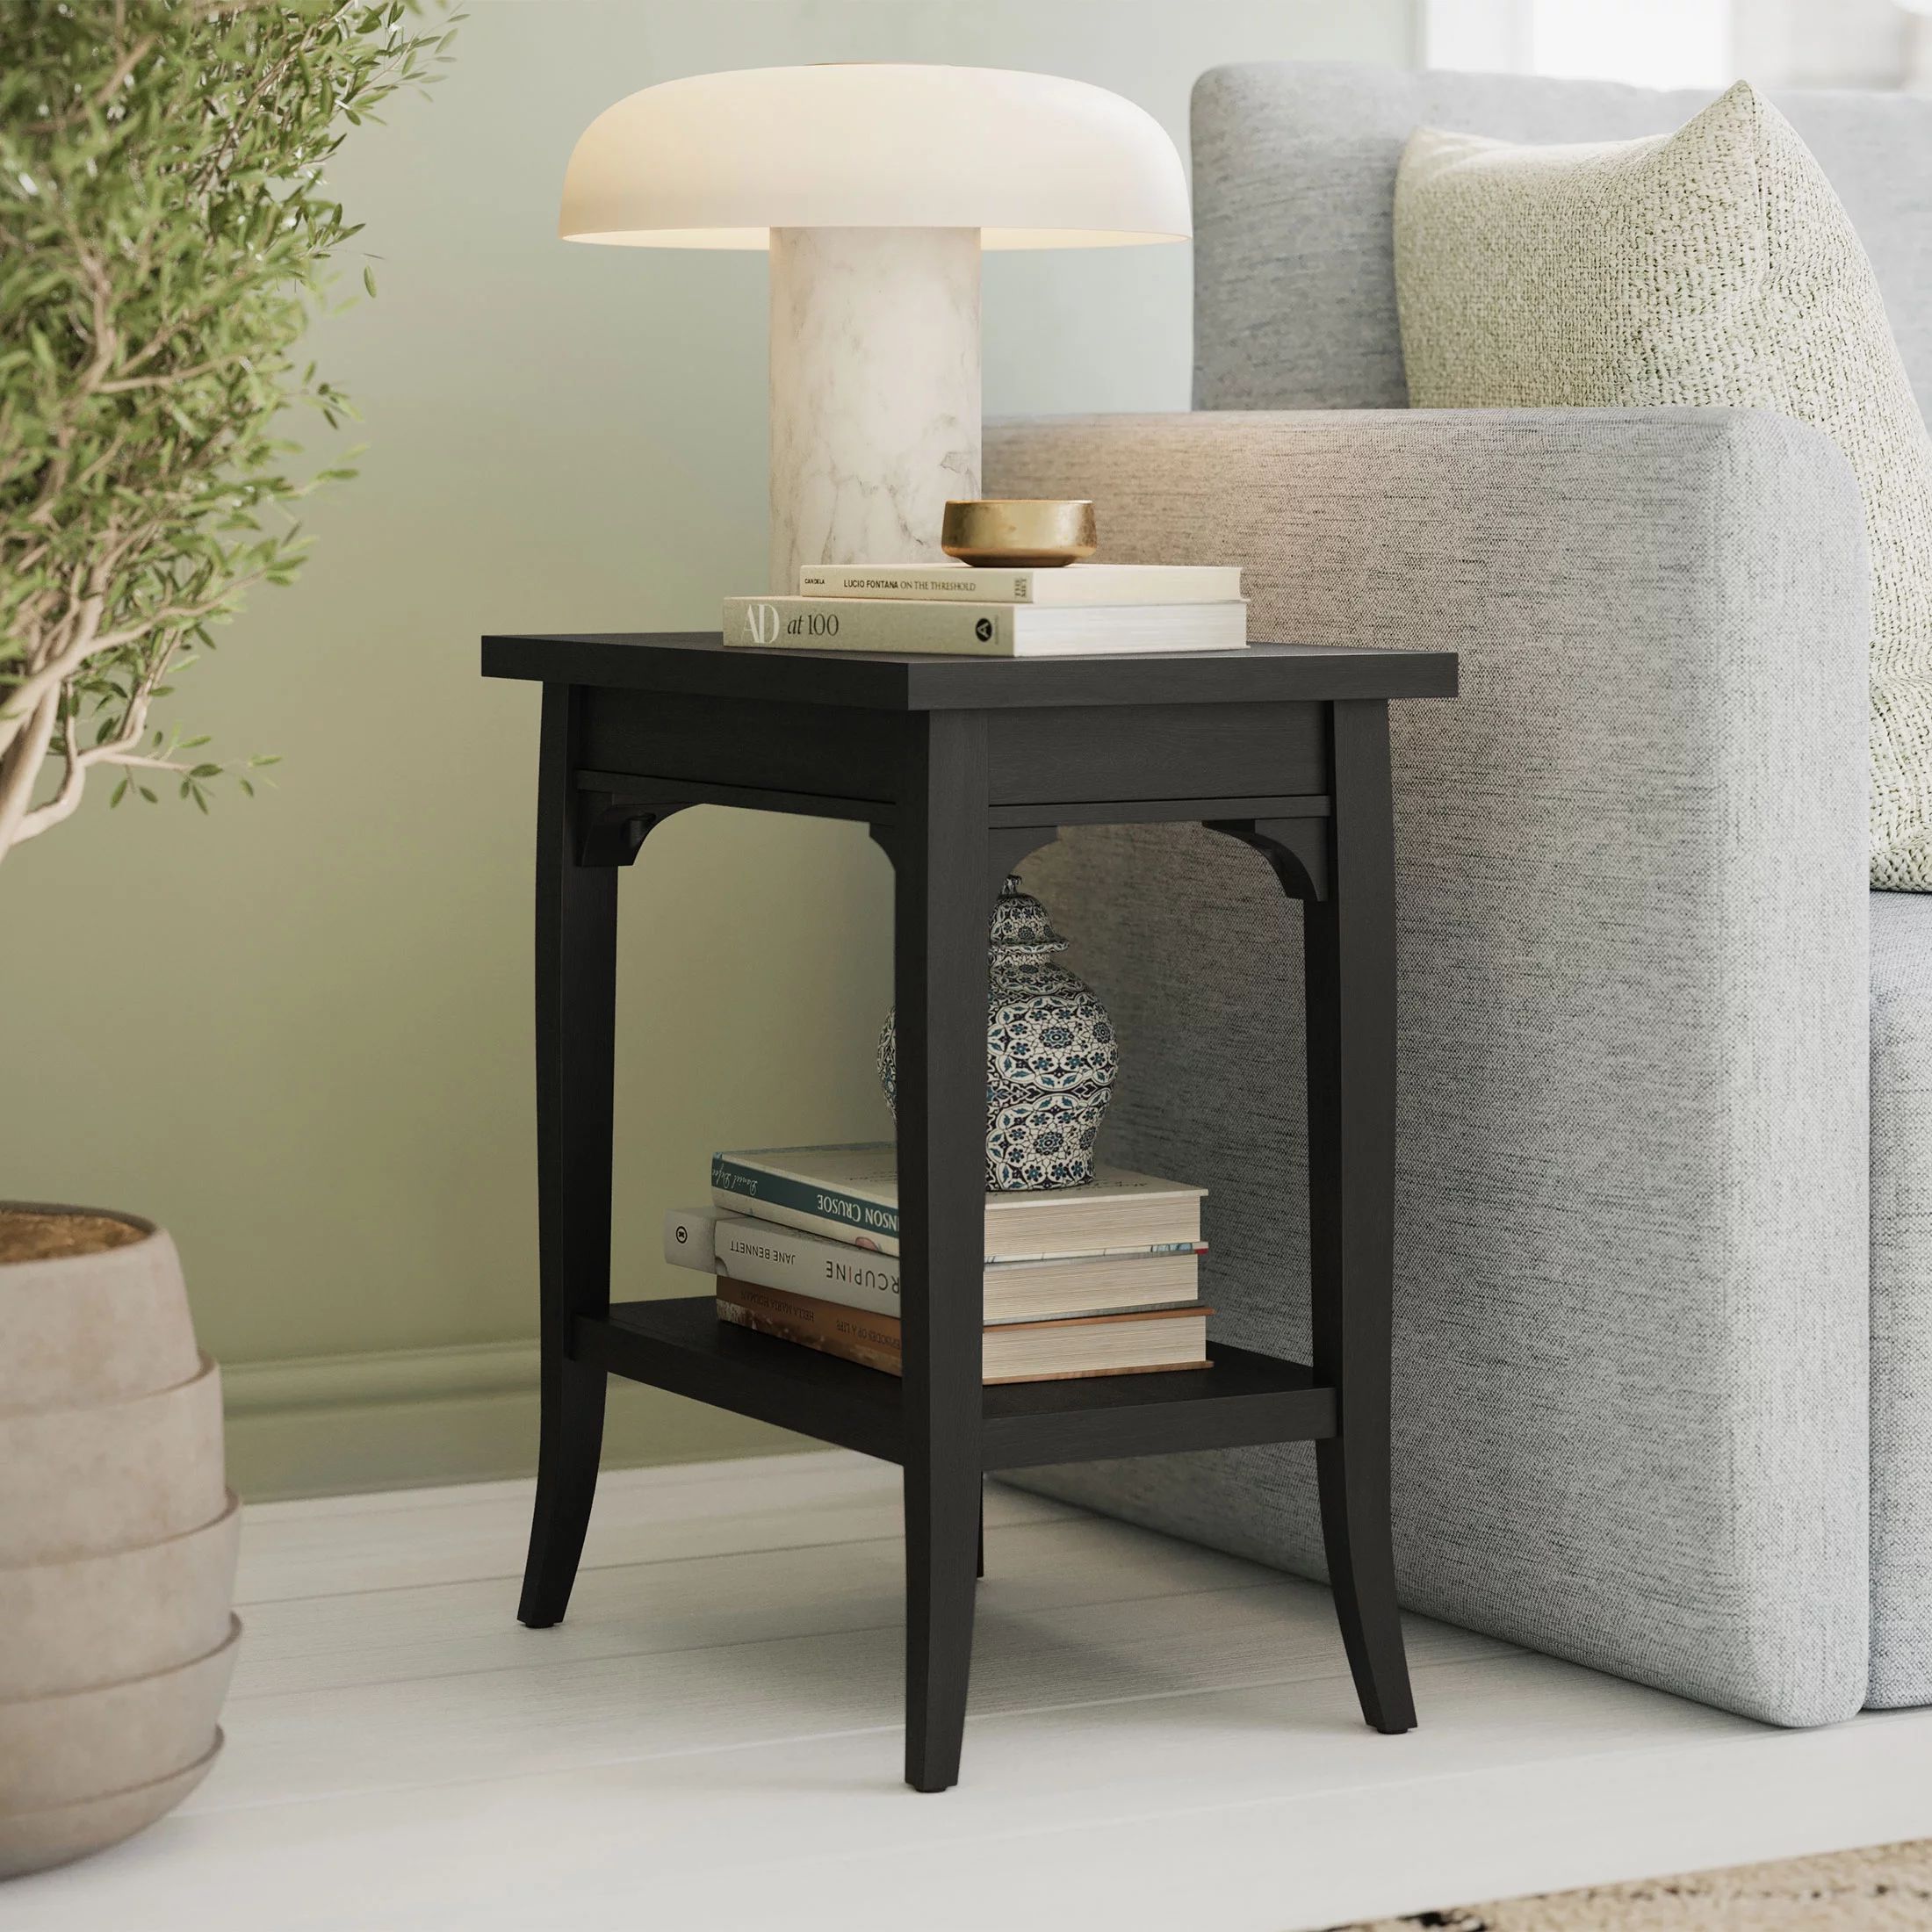 Beautiful Marais Side Table with Lower Shelf and Solid Wood Frame by Drew Barrymore, Rich Black F... | Walmart (US)